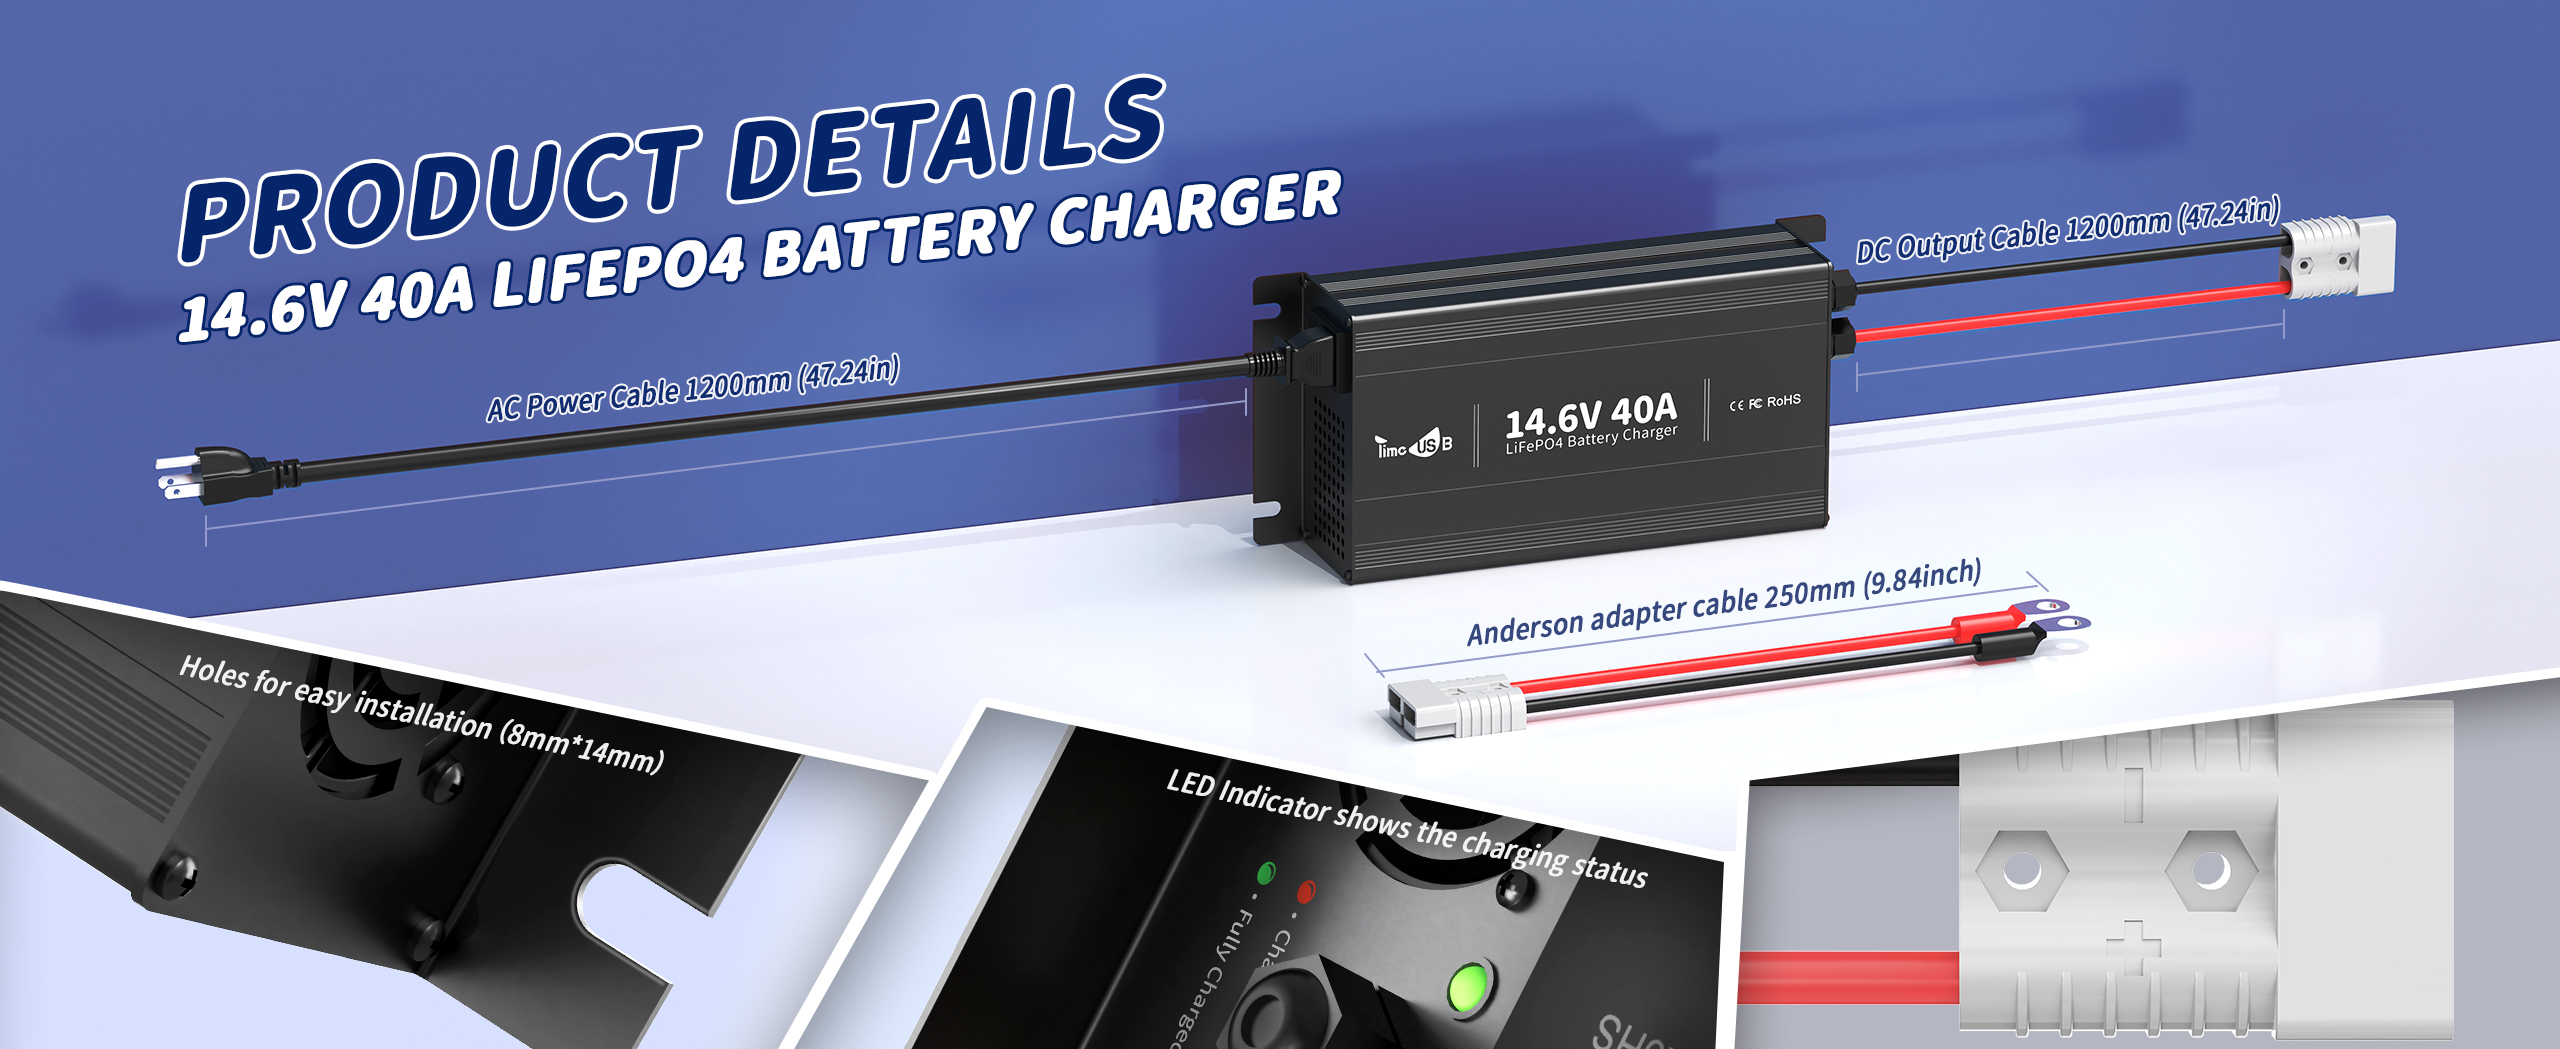 Product details for 14.6V 40A battery charger, smart battery charger